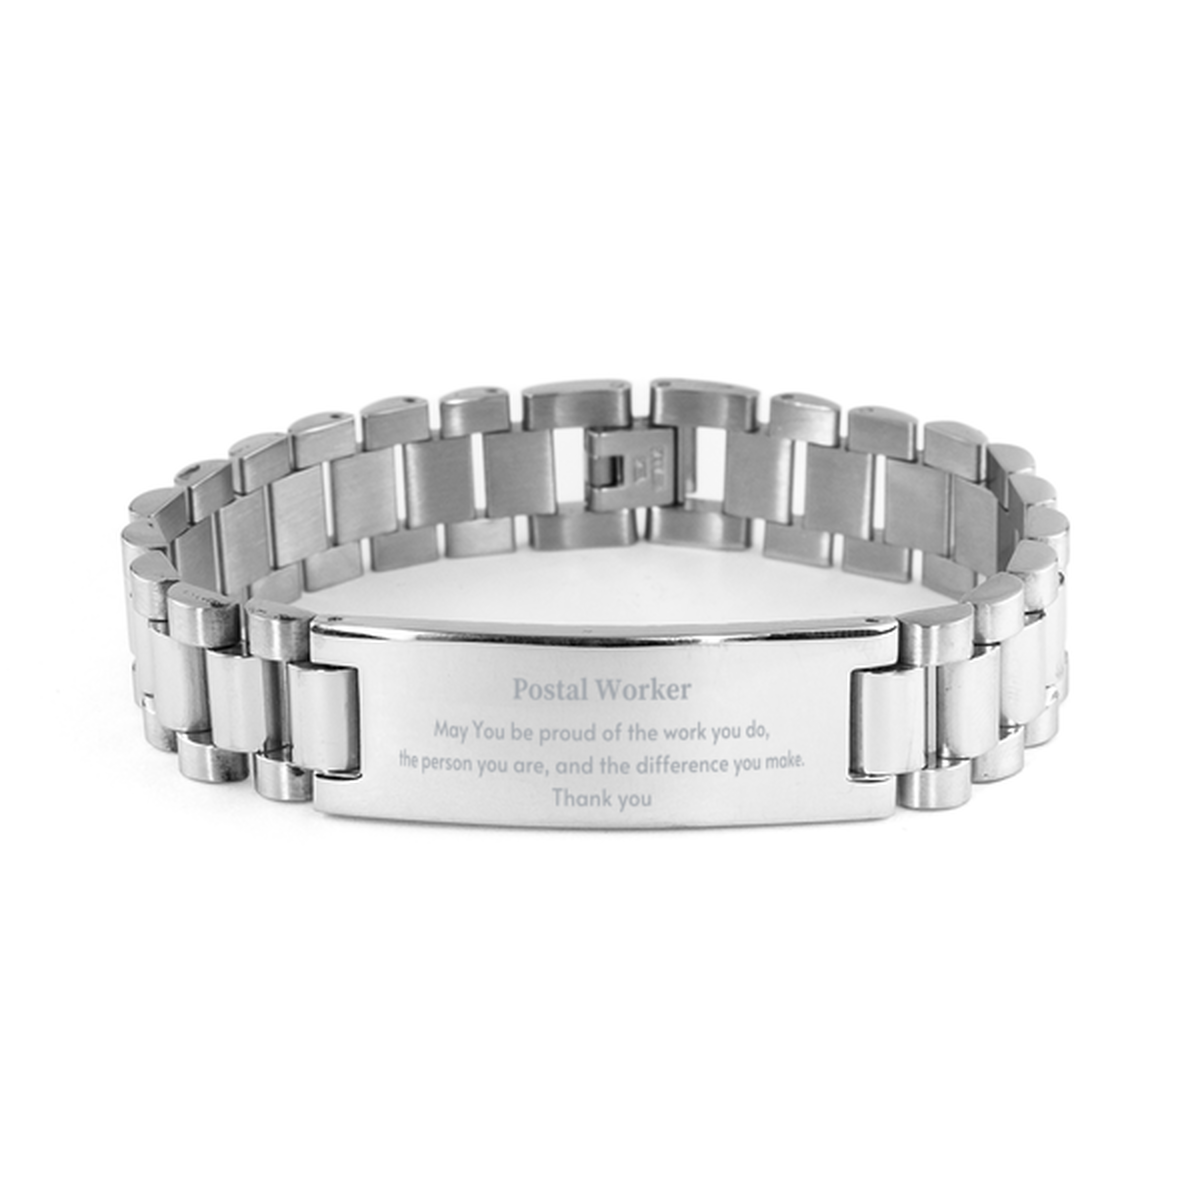 Heartwarming Ladder Stainless Steel Bracelet Retirement Coworkers Gifts for Postal Worker, Postal Worker May You be proud of the work you do, the person you are Gifts for Boss Men Women Friends